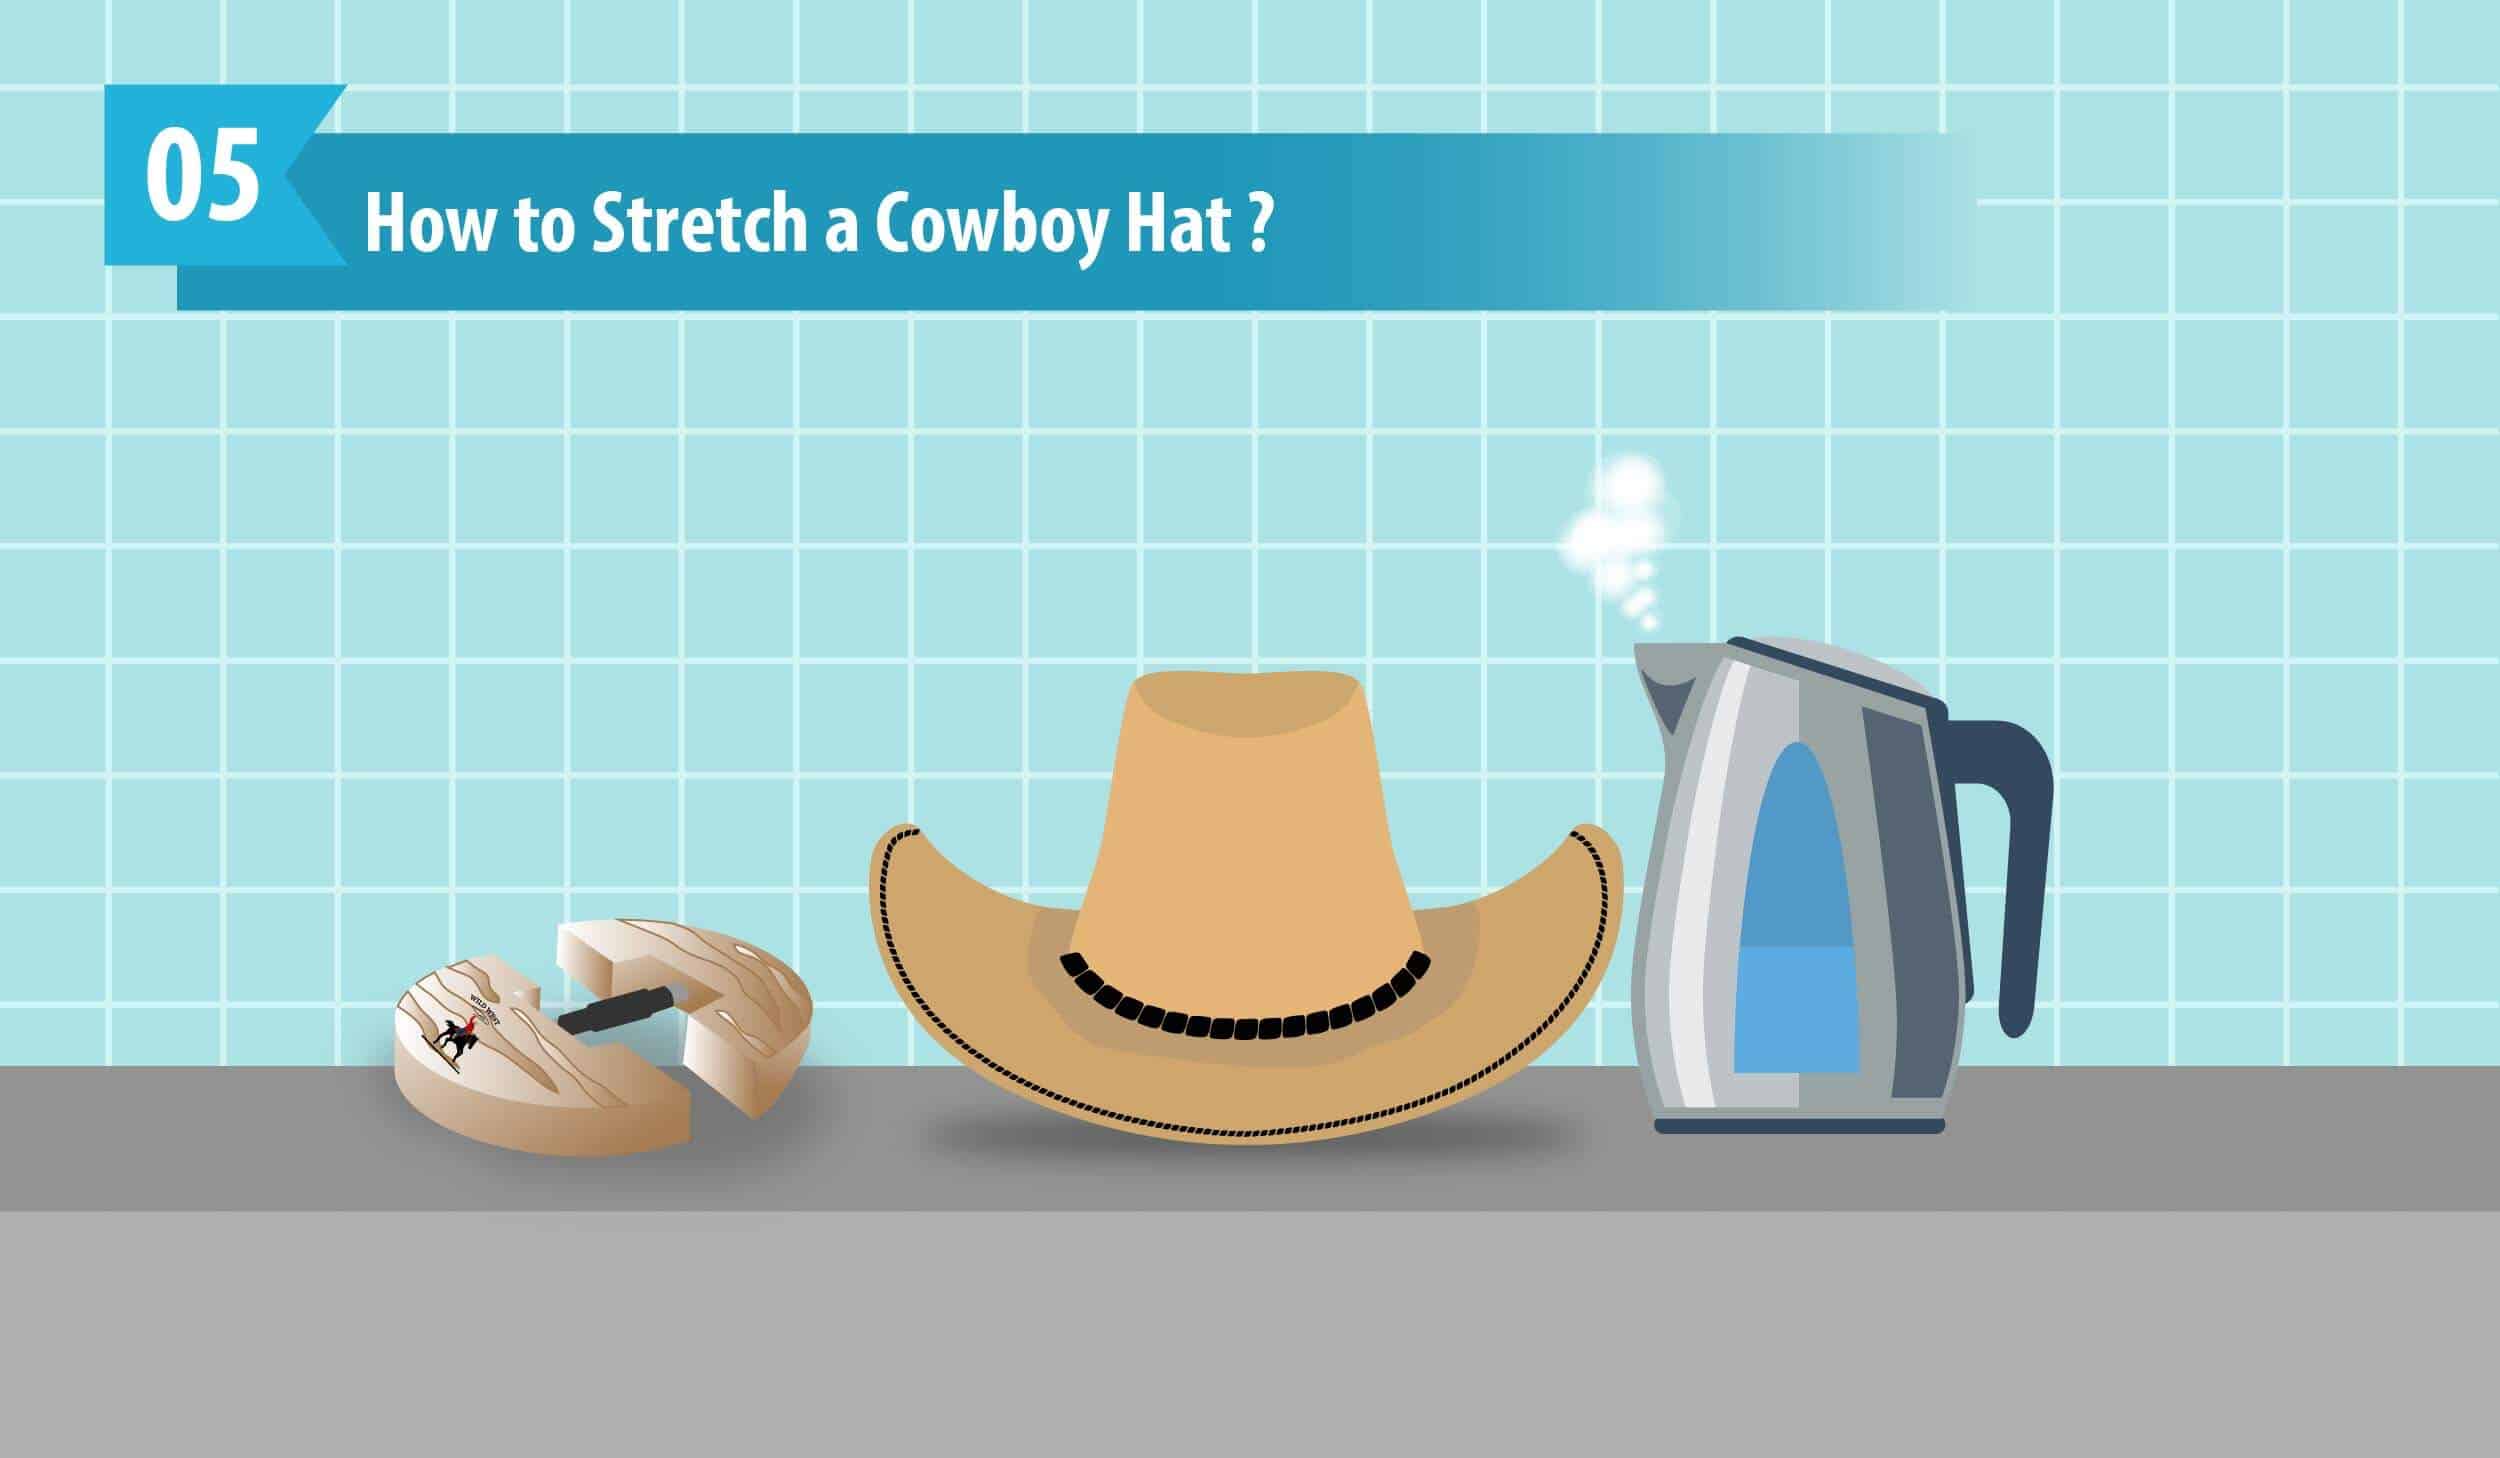 How to Stretch a Cowboy Hat